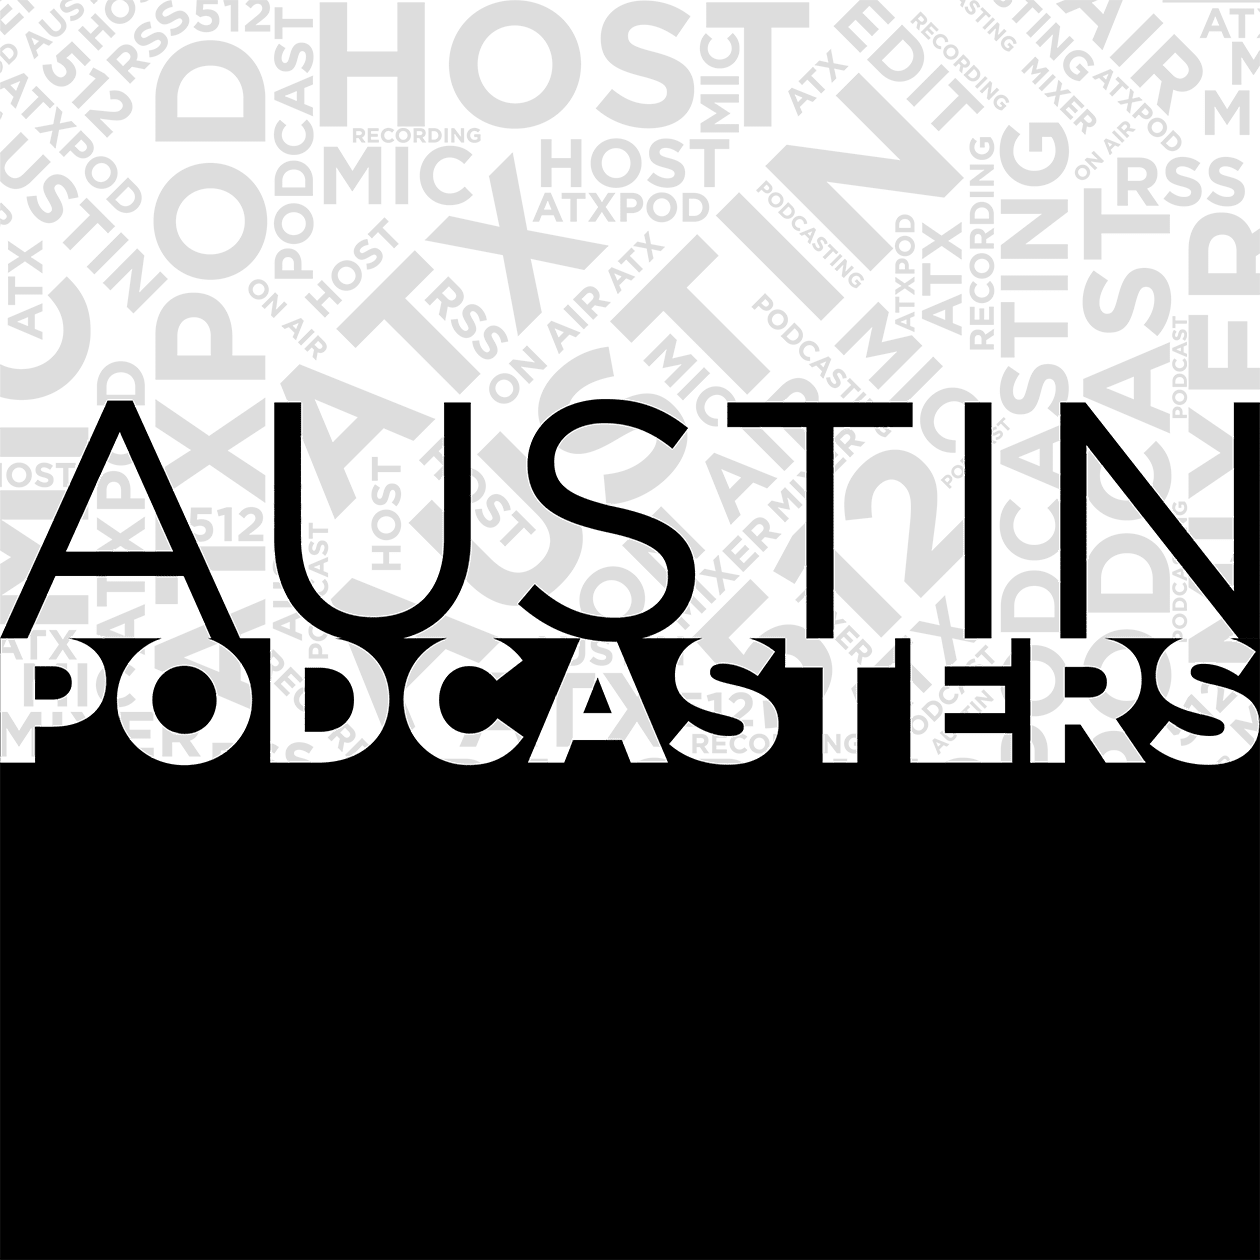 Tuesday’s Listen: The Austin Podcasters